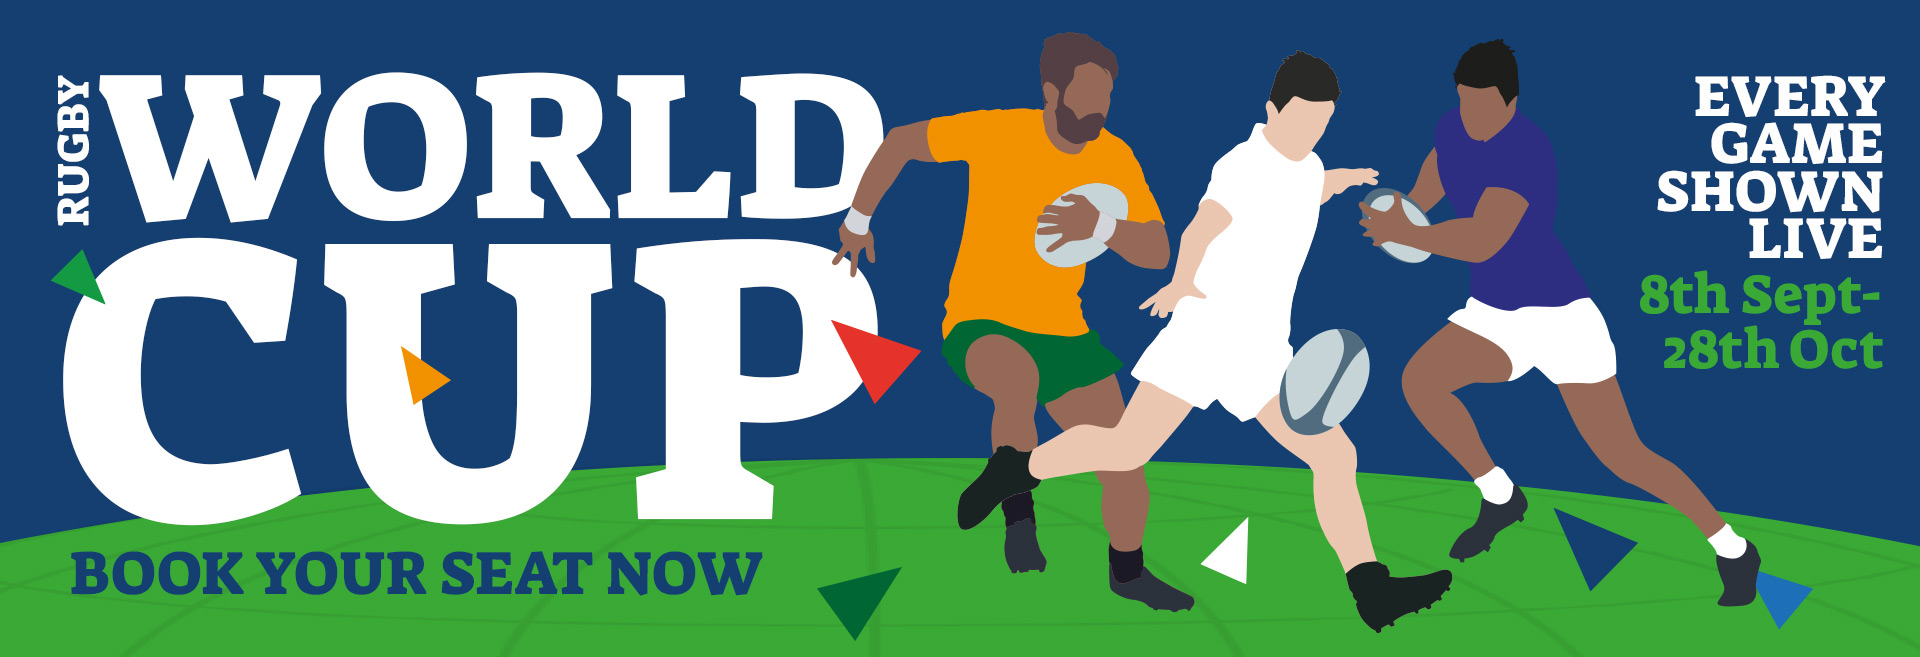 Watch the Rugby World Cup at The Prince of Wales Feathers